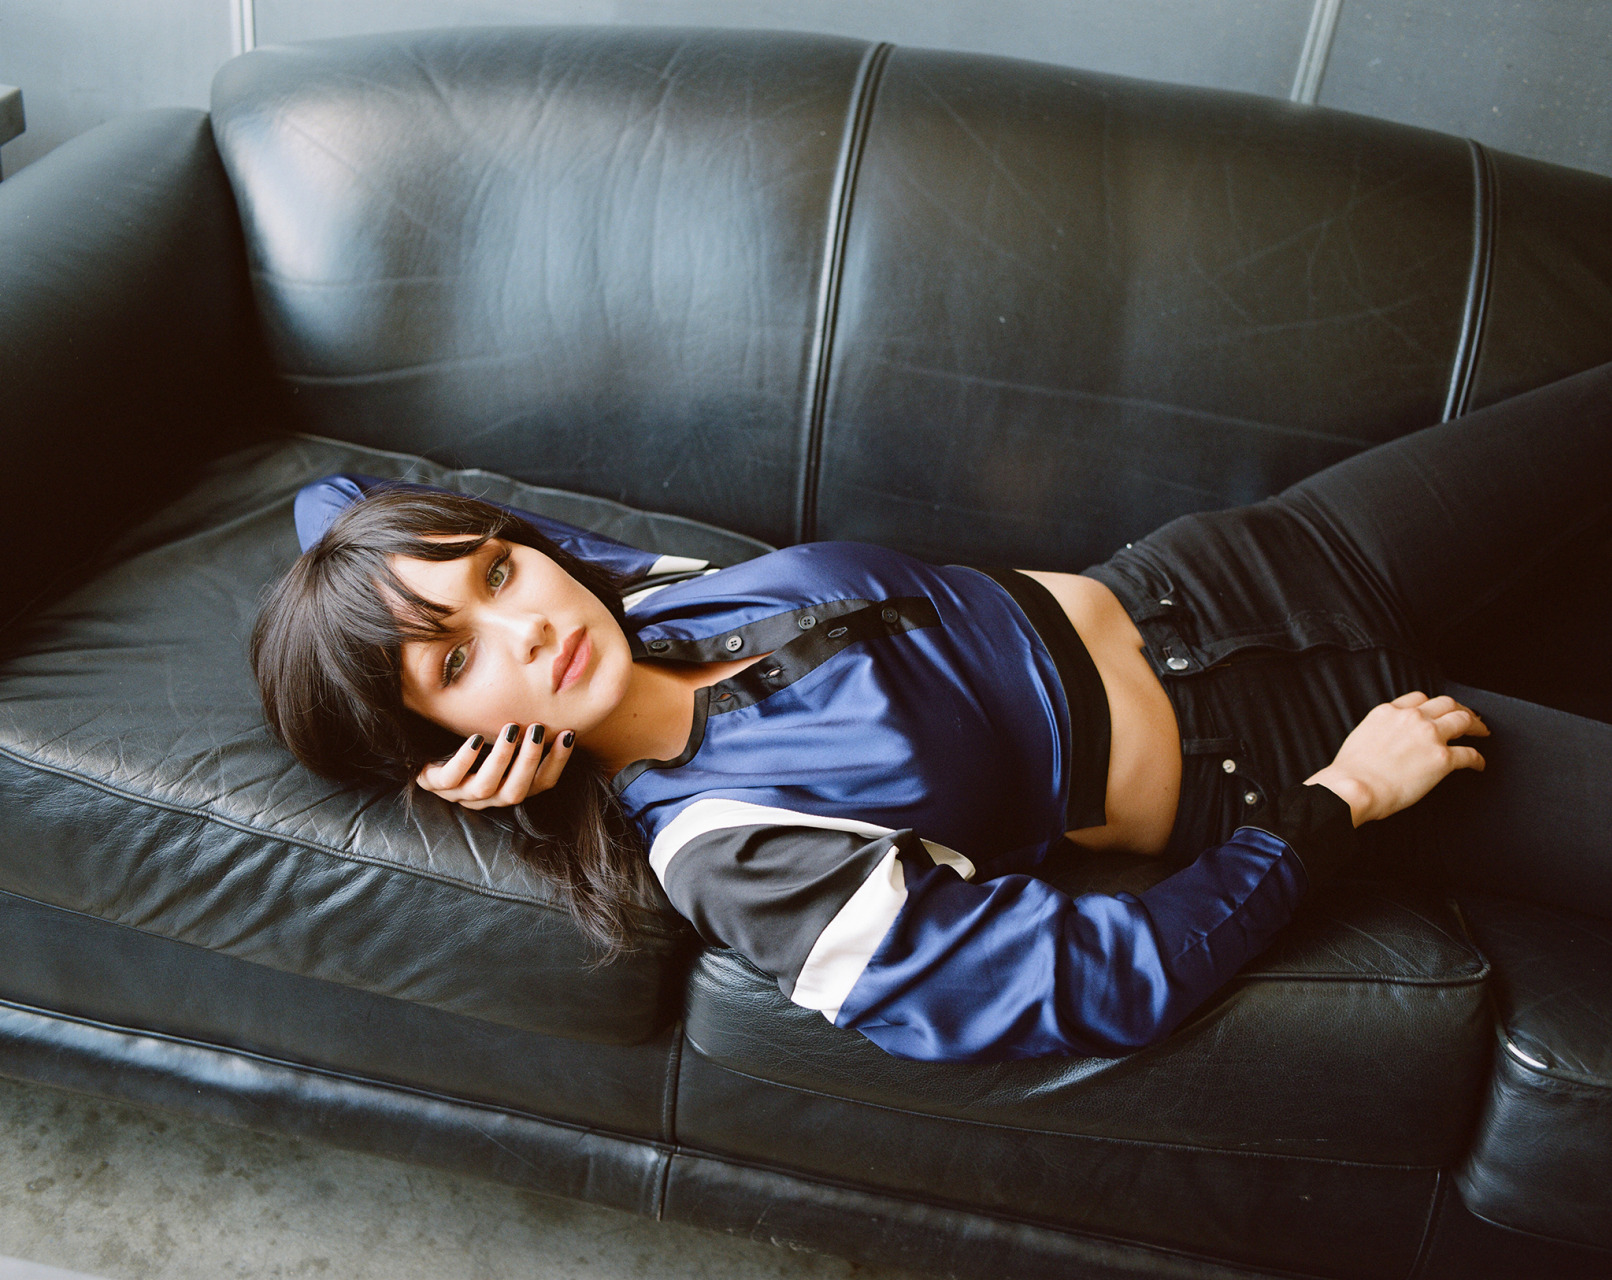 Bare Midriff Black Pants Lying Down Lying On Couch Dark Hair Green Eyes Closed Mouth Black Nails Pho 1612x1280